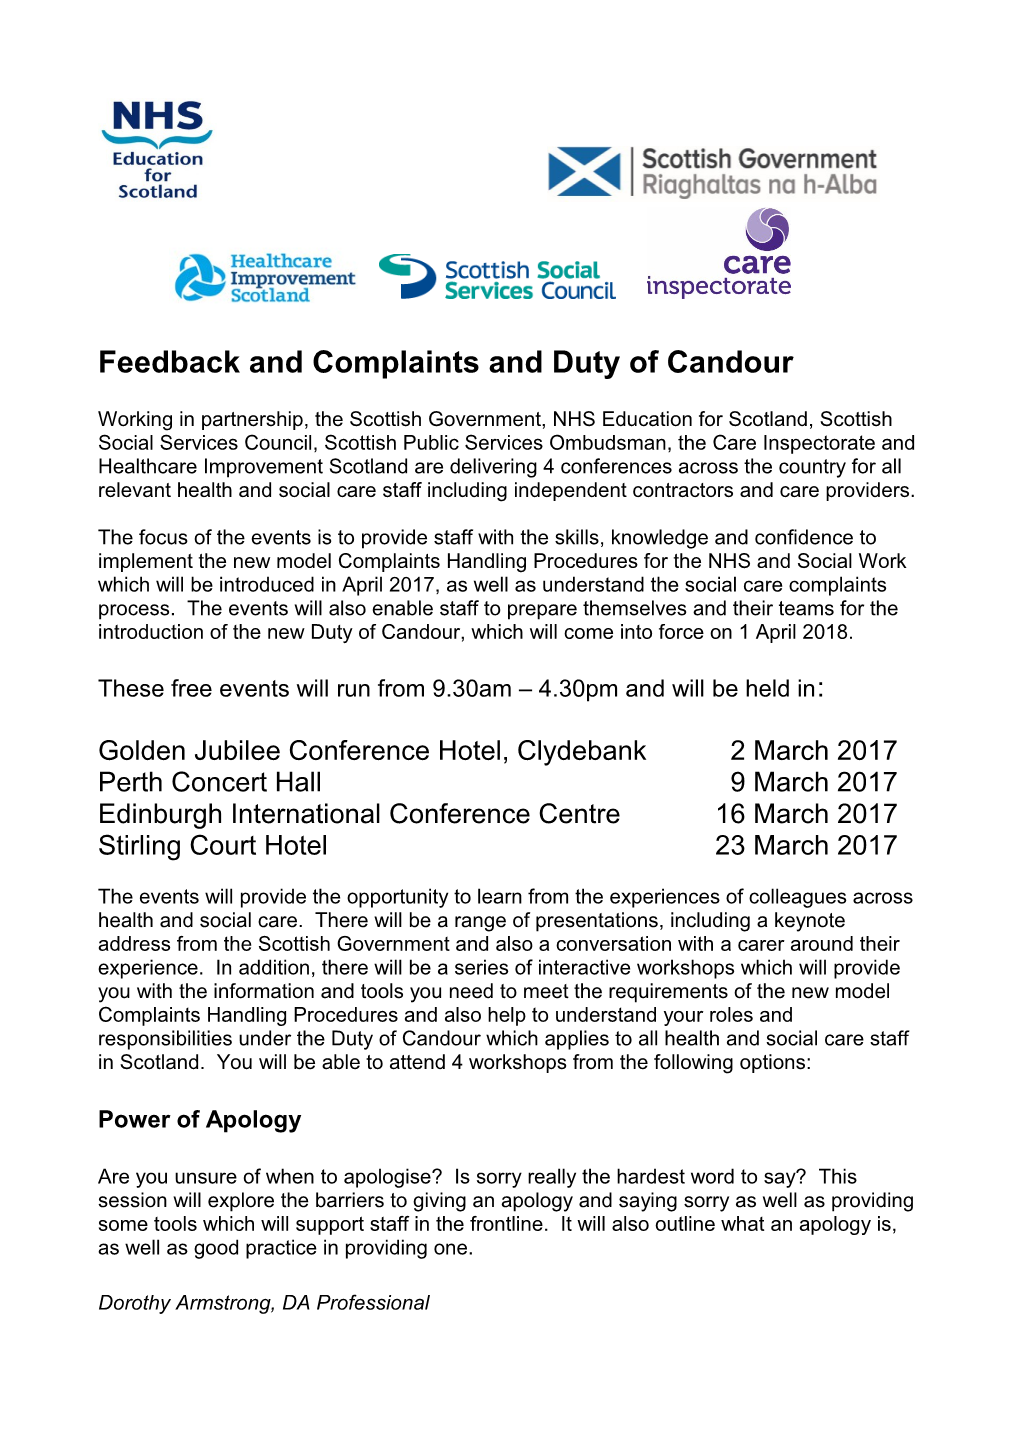 Feedback and Complaints and Duty of Candour